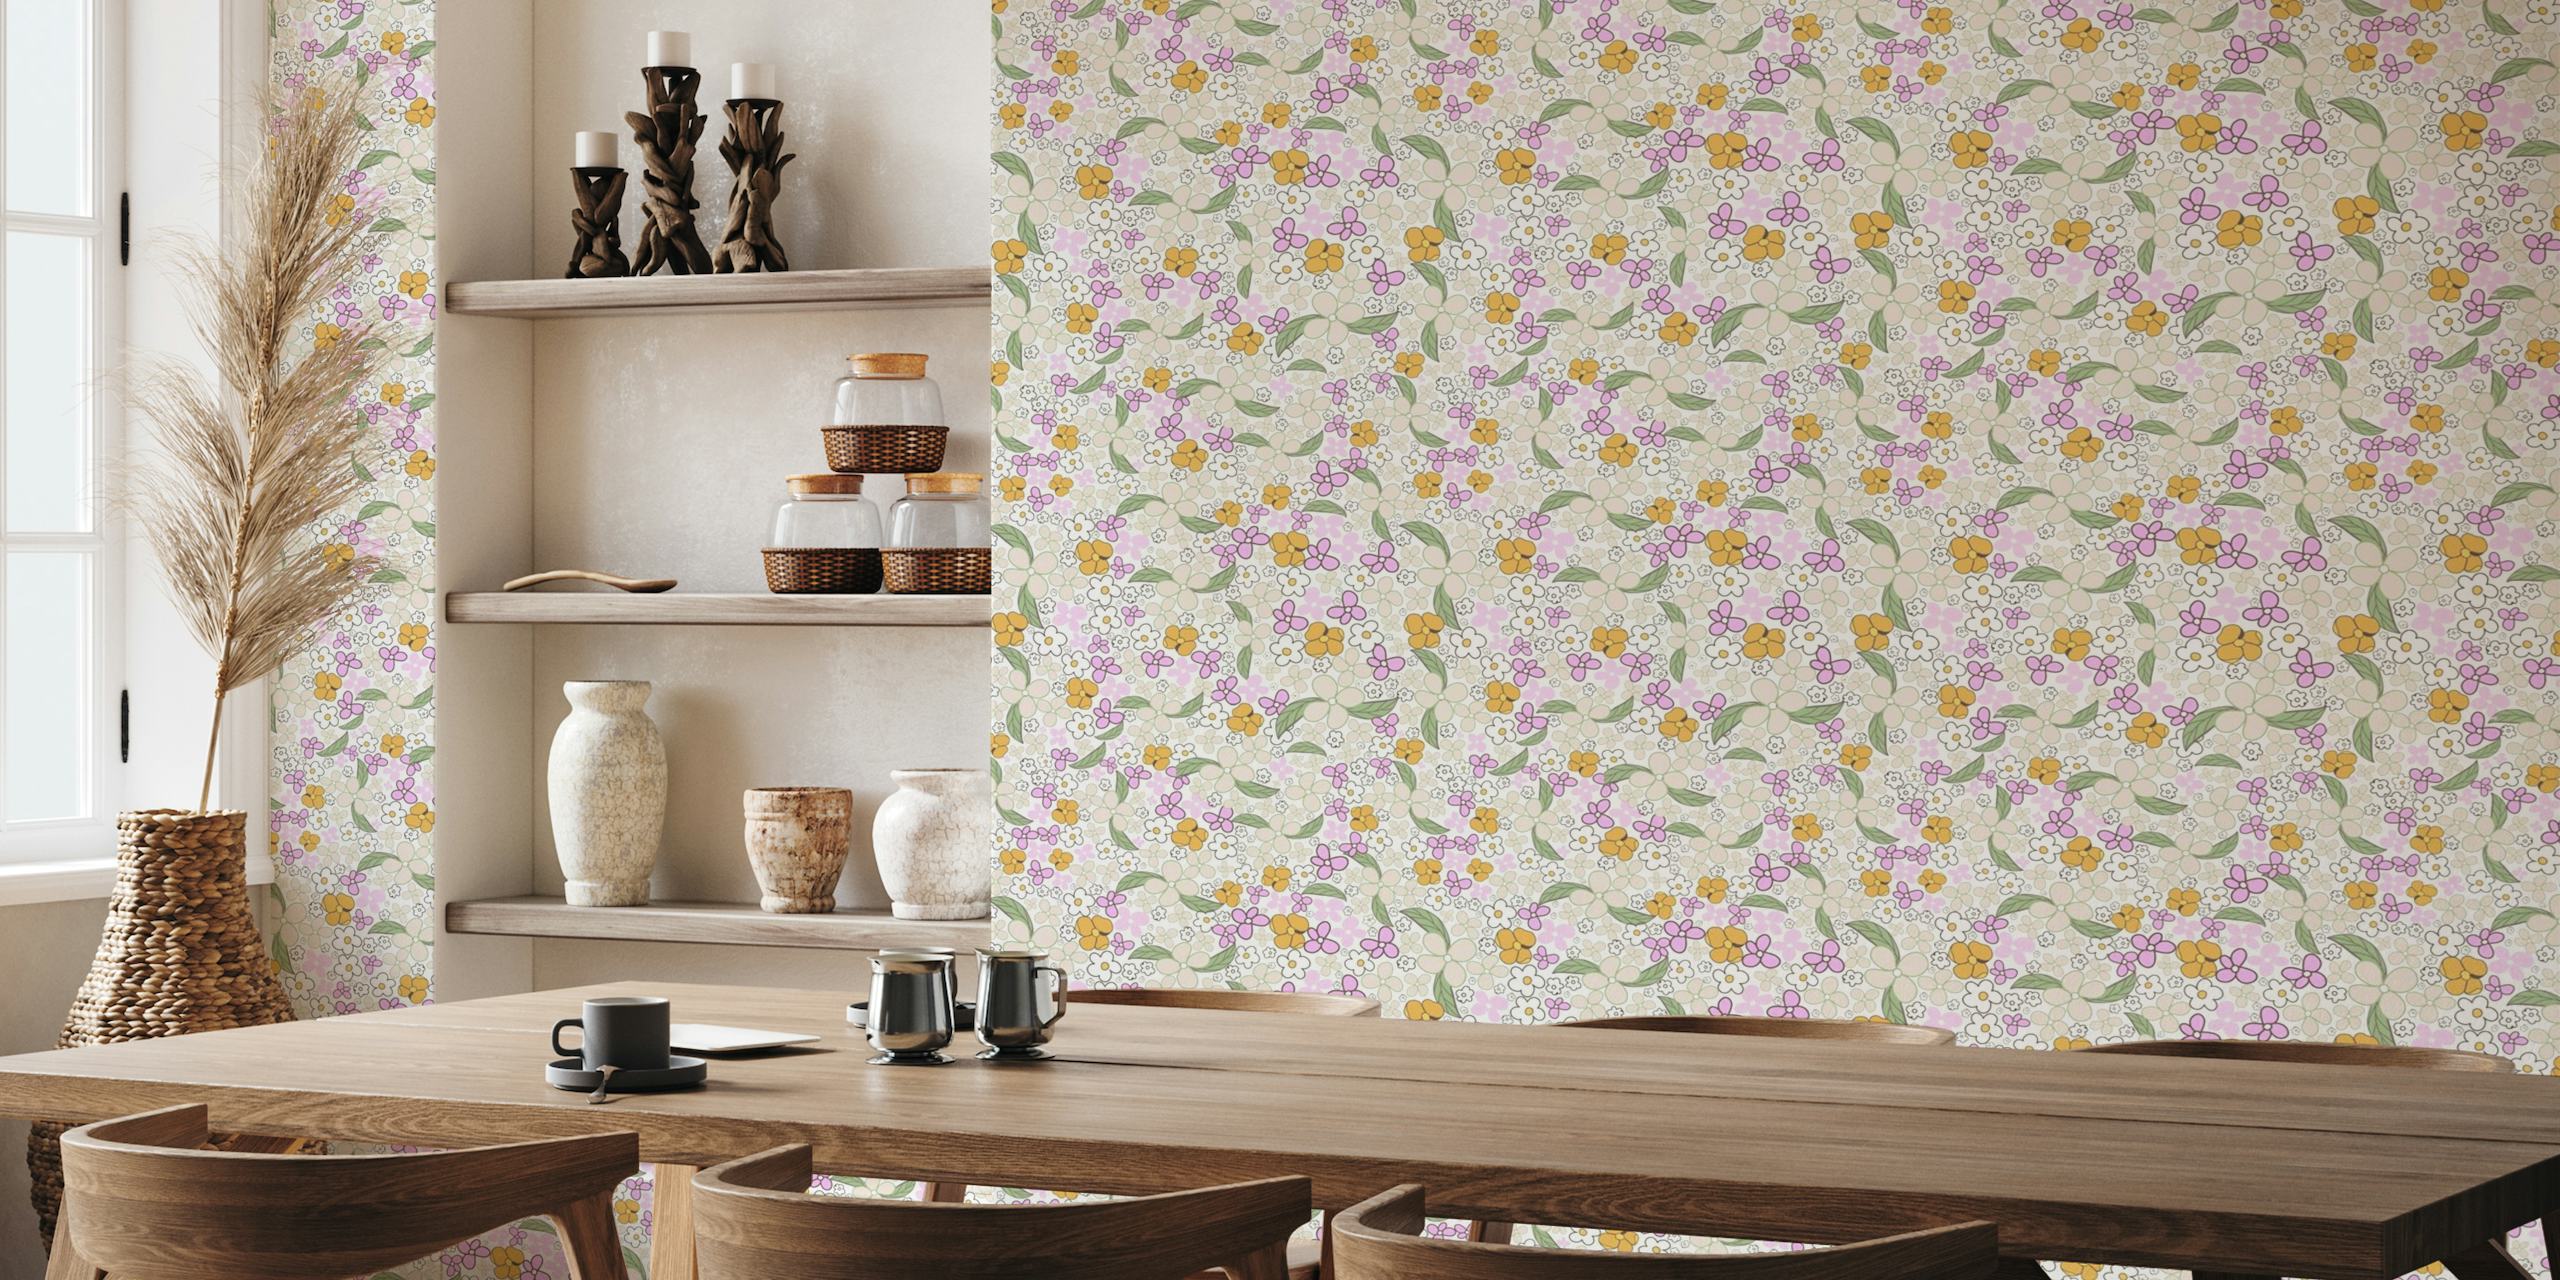 Ditsy 4 pattern wall mural featuring small flowers and leaves in soft colors